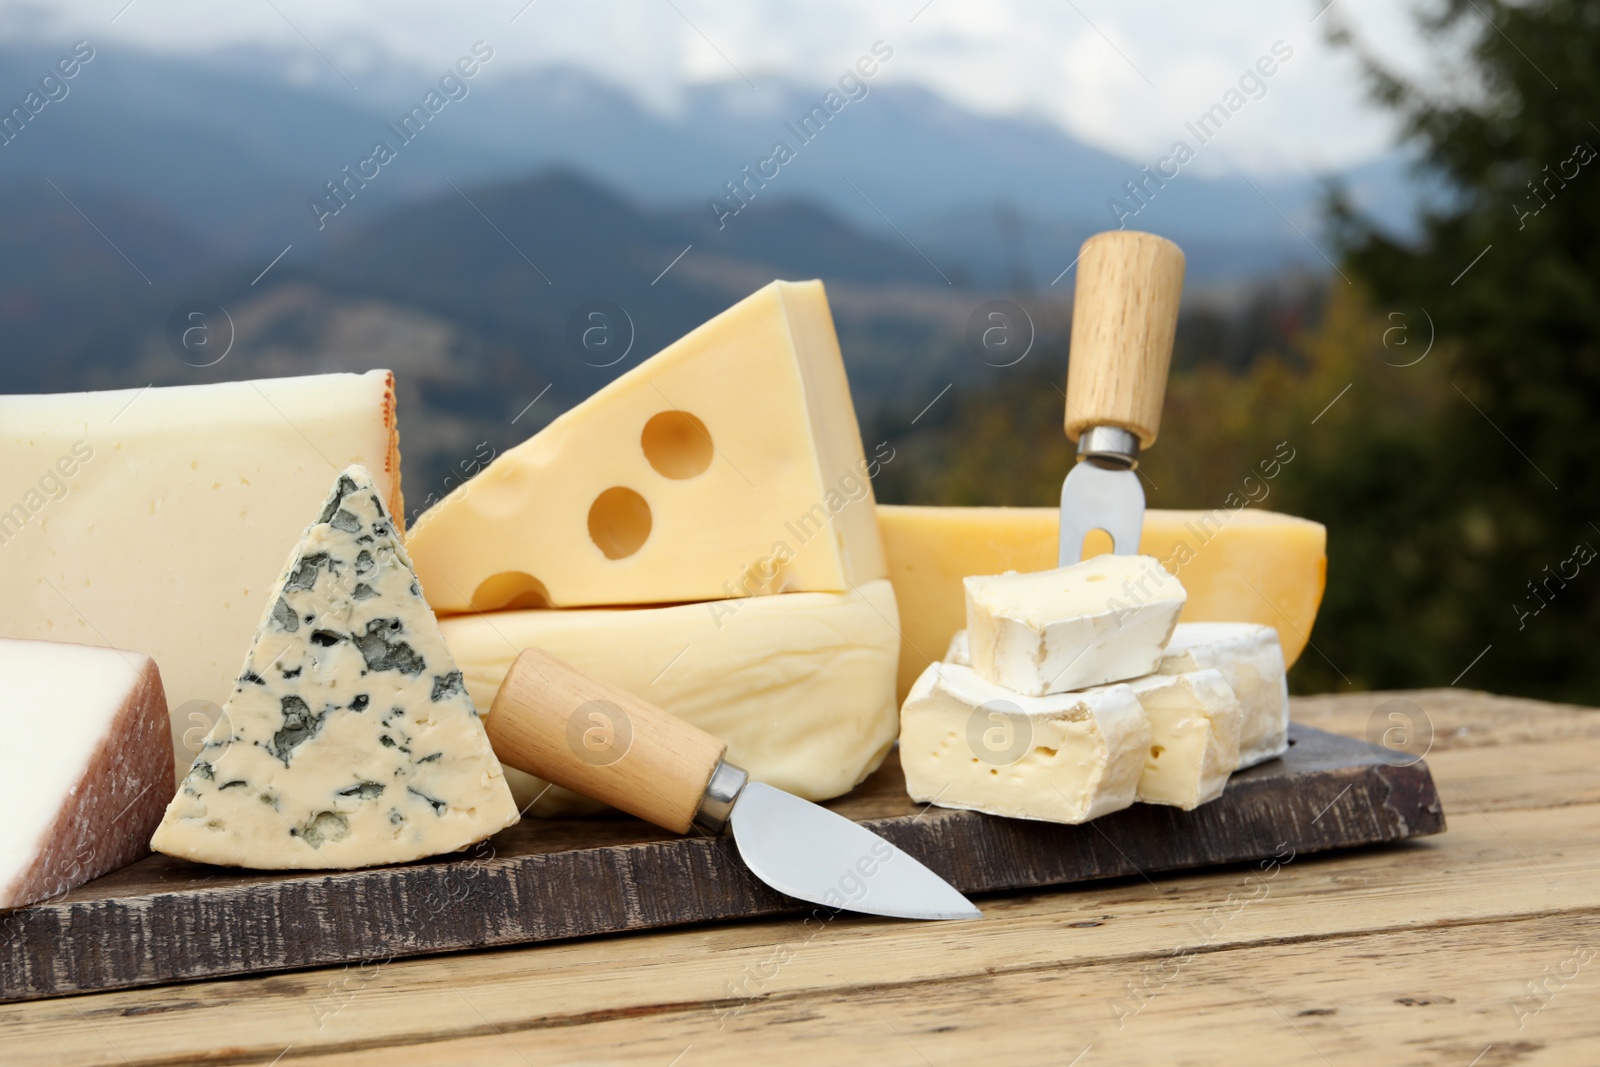 Photo of Different types of delicious cheeses on wooden table against mountain landscape